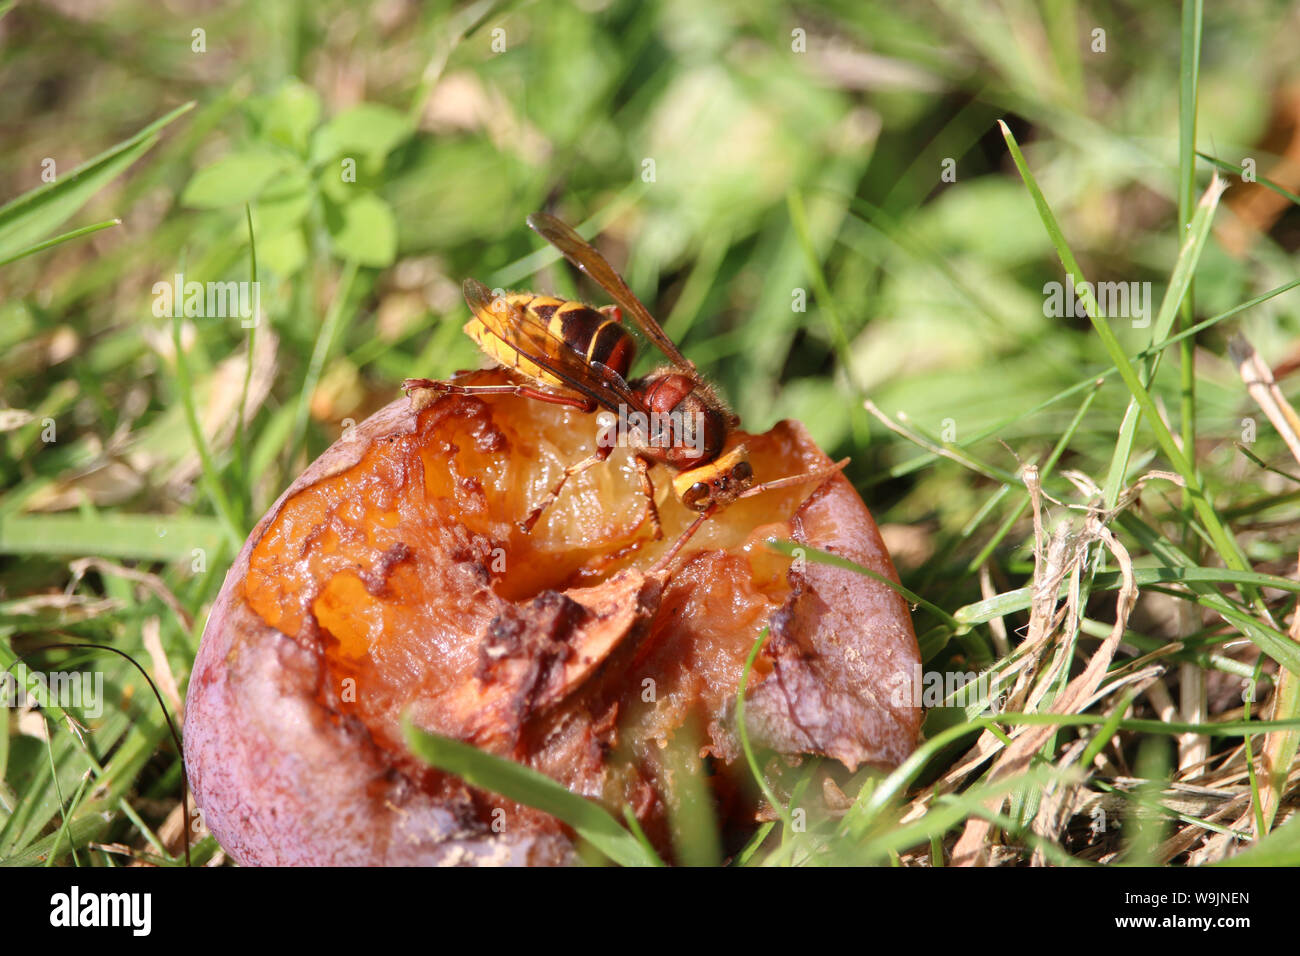 Hornet, Vespa crabro, eating a ripe plum on the ground surrounded by grass. Stock Photo